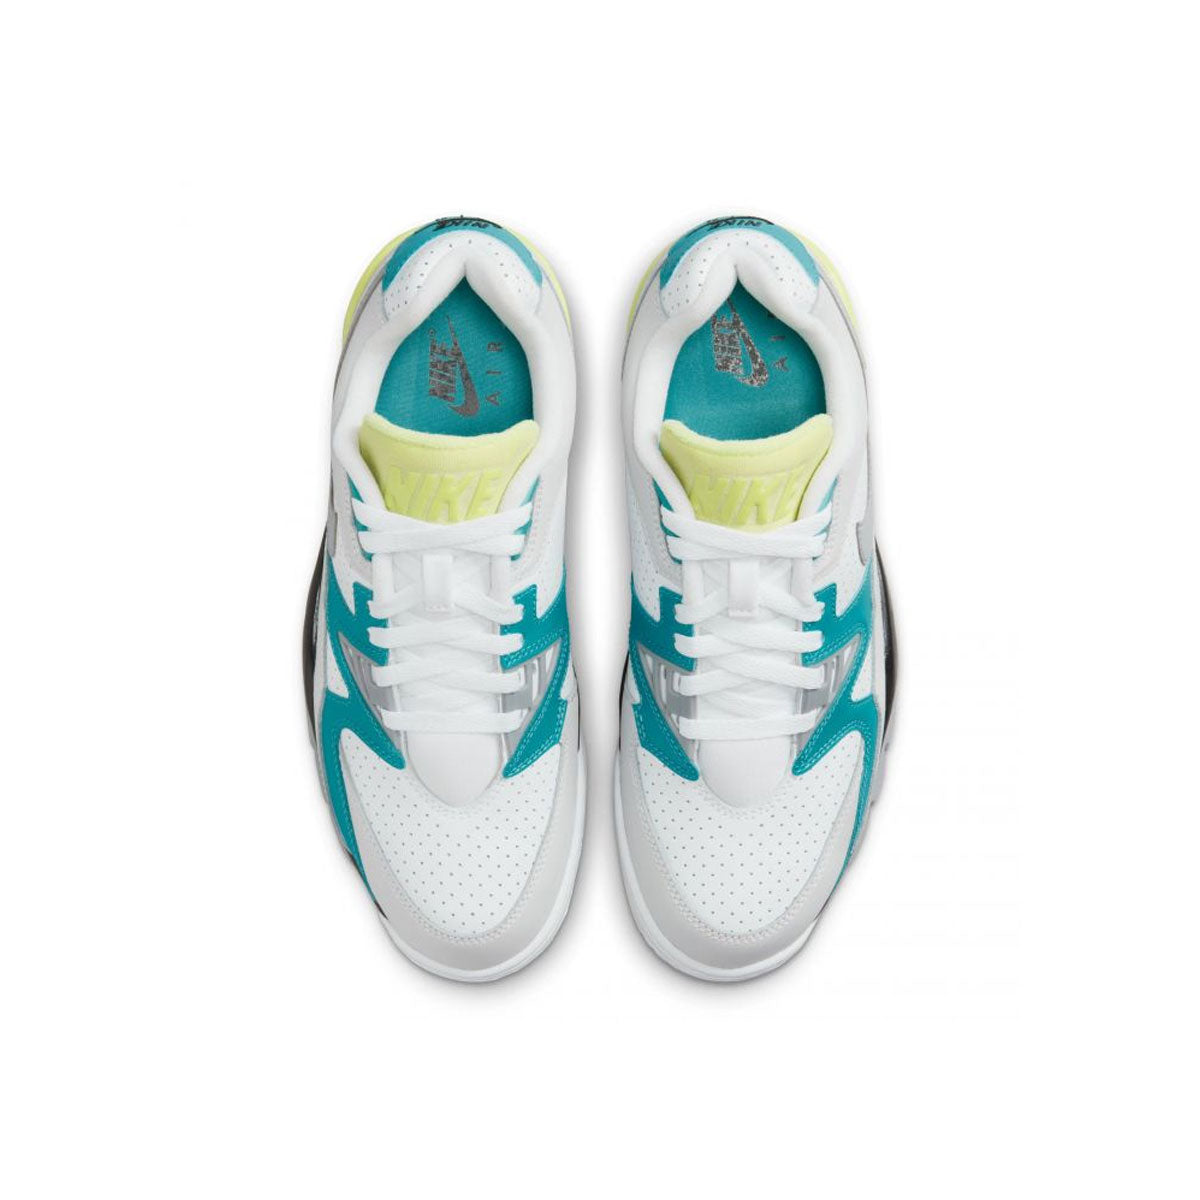 Nike Air Corss Trainer 3 Low